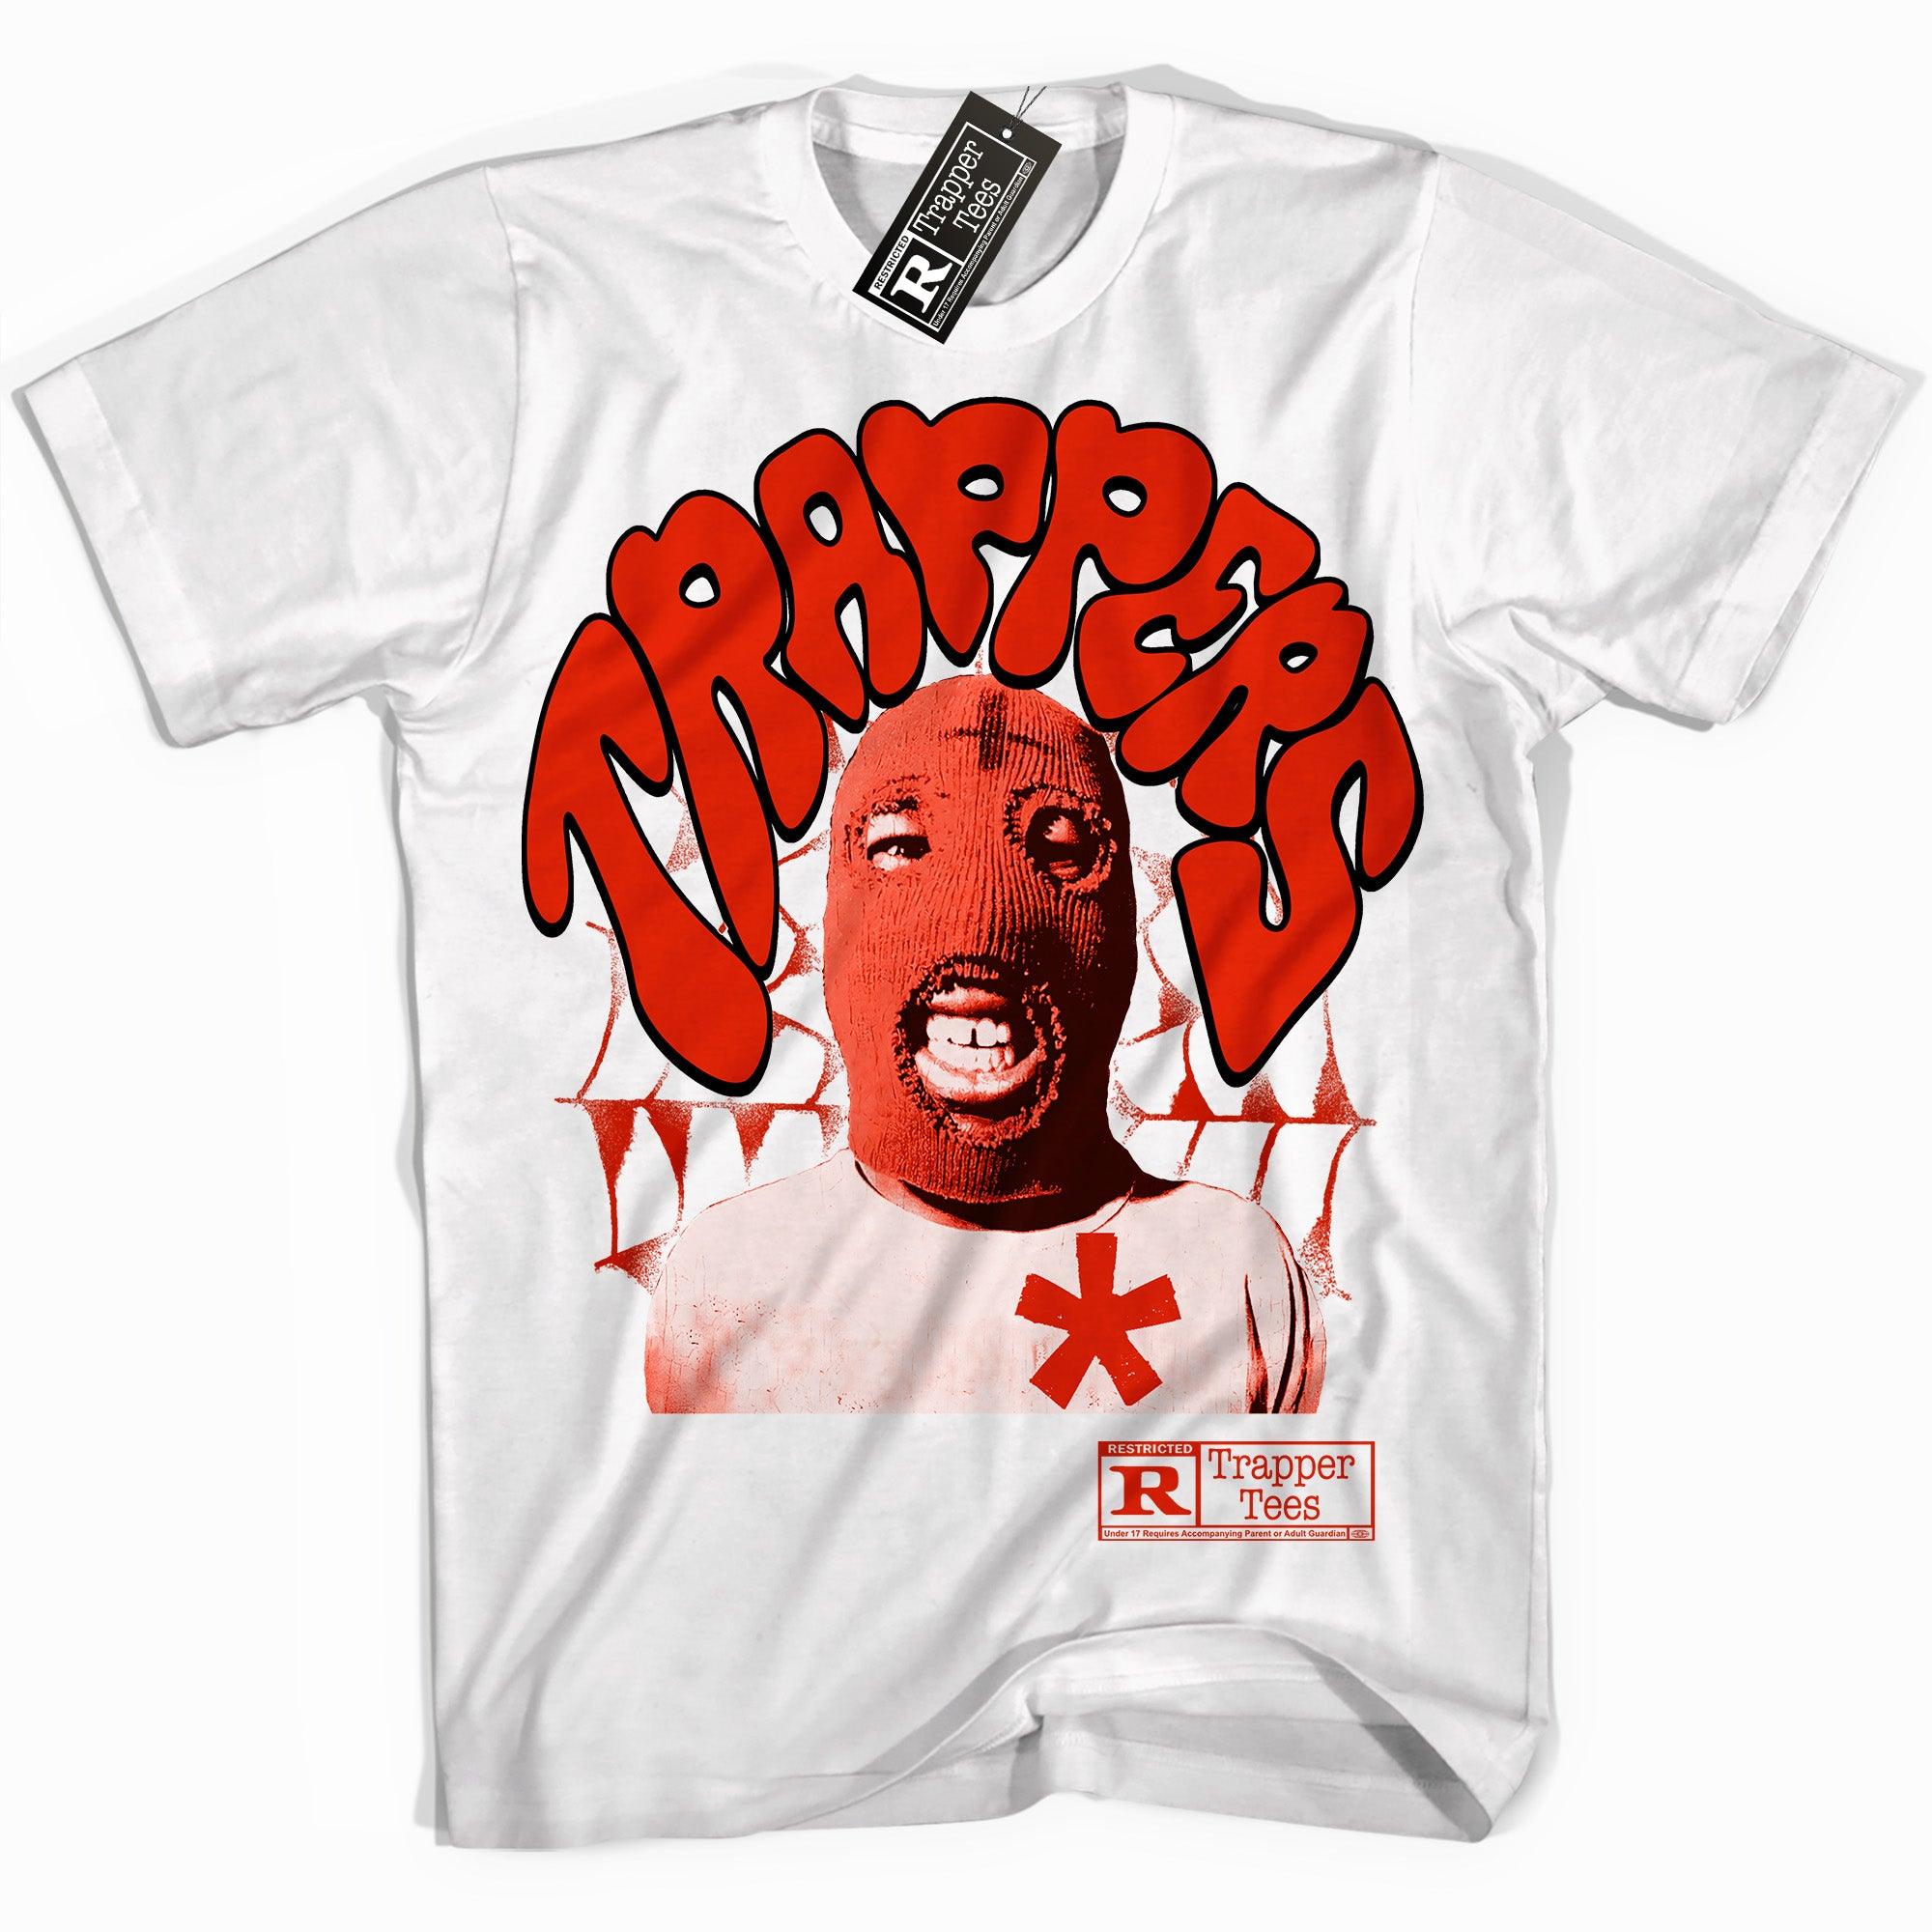 Cool White graphic tee with “ Trapper Ski Mask ” print, that perfectly matches Air Jordan 11 Cherry sneakers 